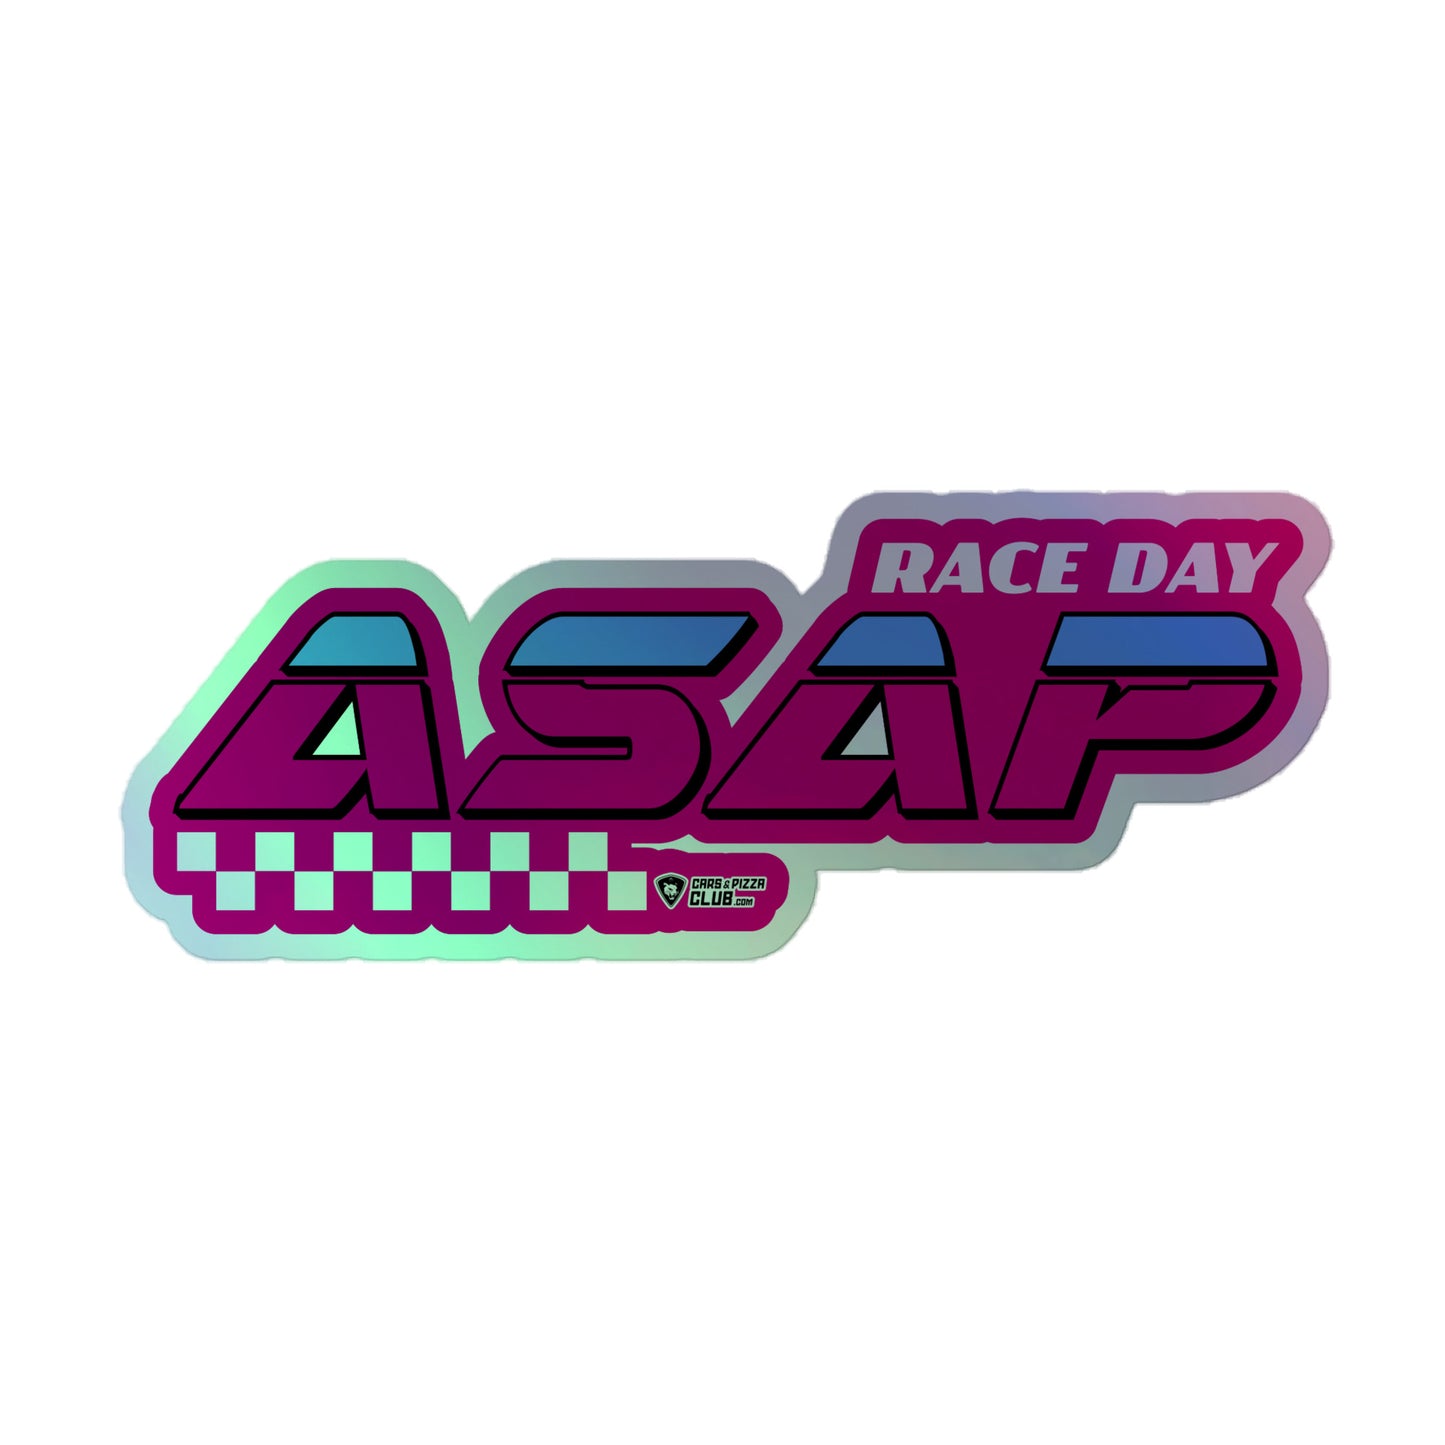 Holographic Die Cut Stickers "Race Day ASAP" Pink